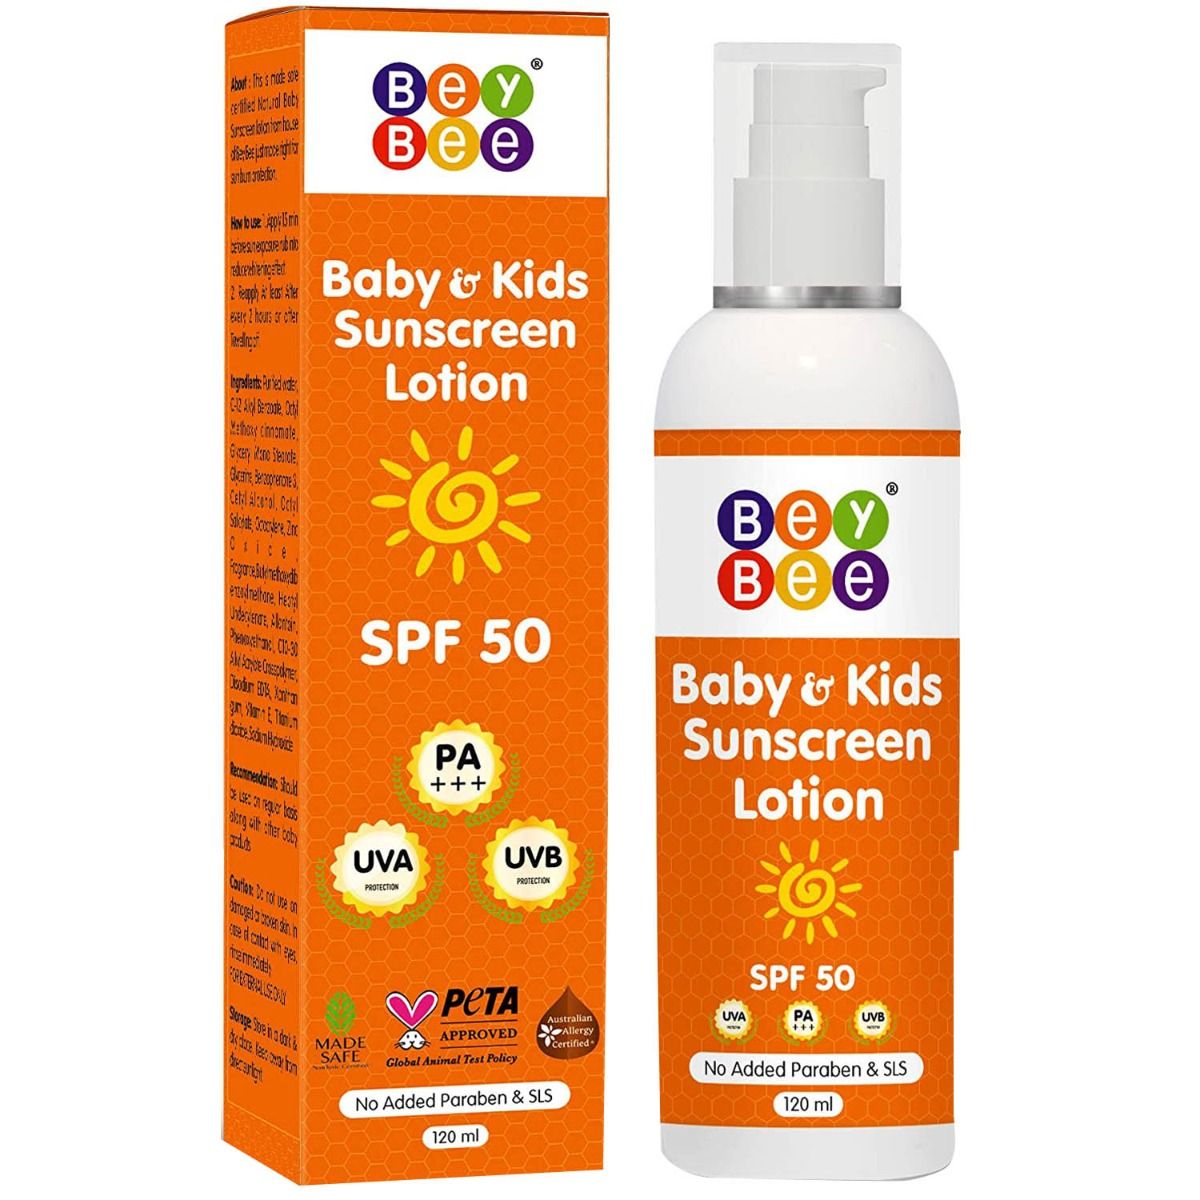 Bey Bee Baby & Kids Sunscreen Lotion SPF 50, 120 ml, Pack of 1 